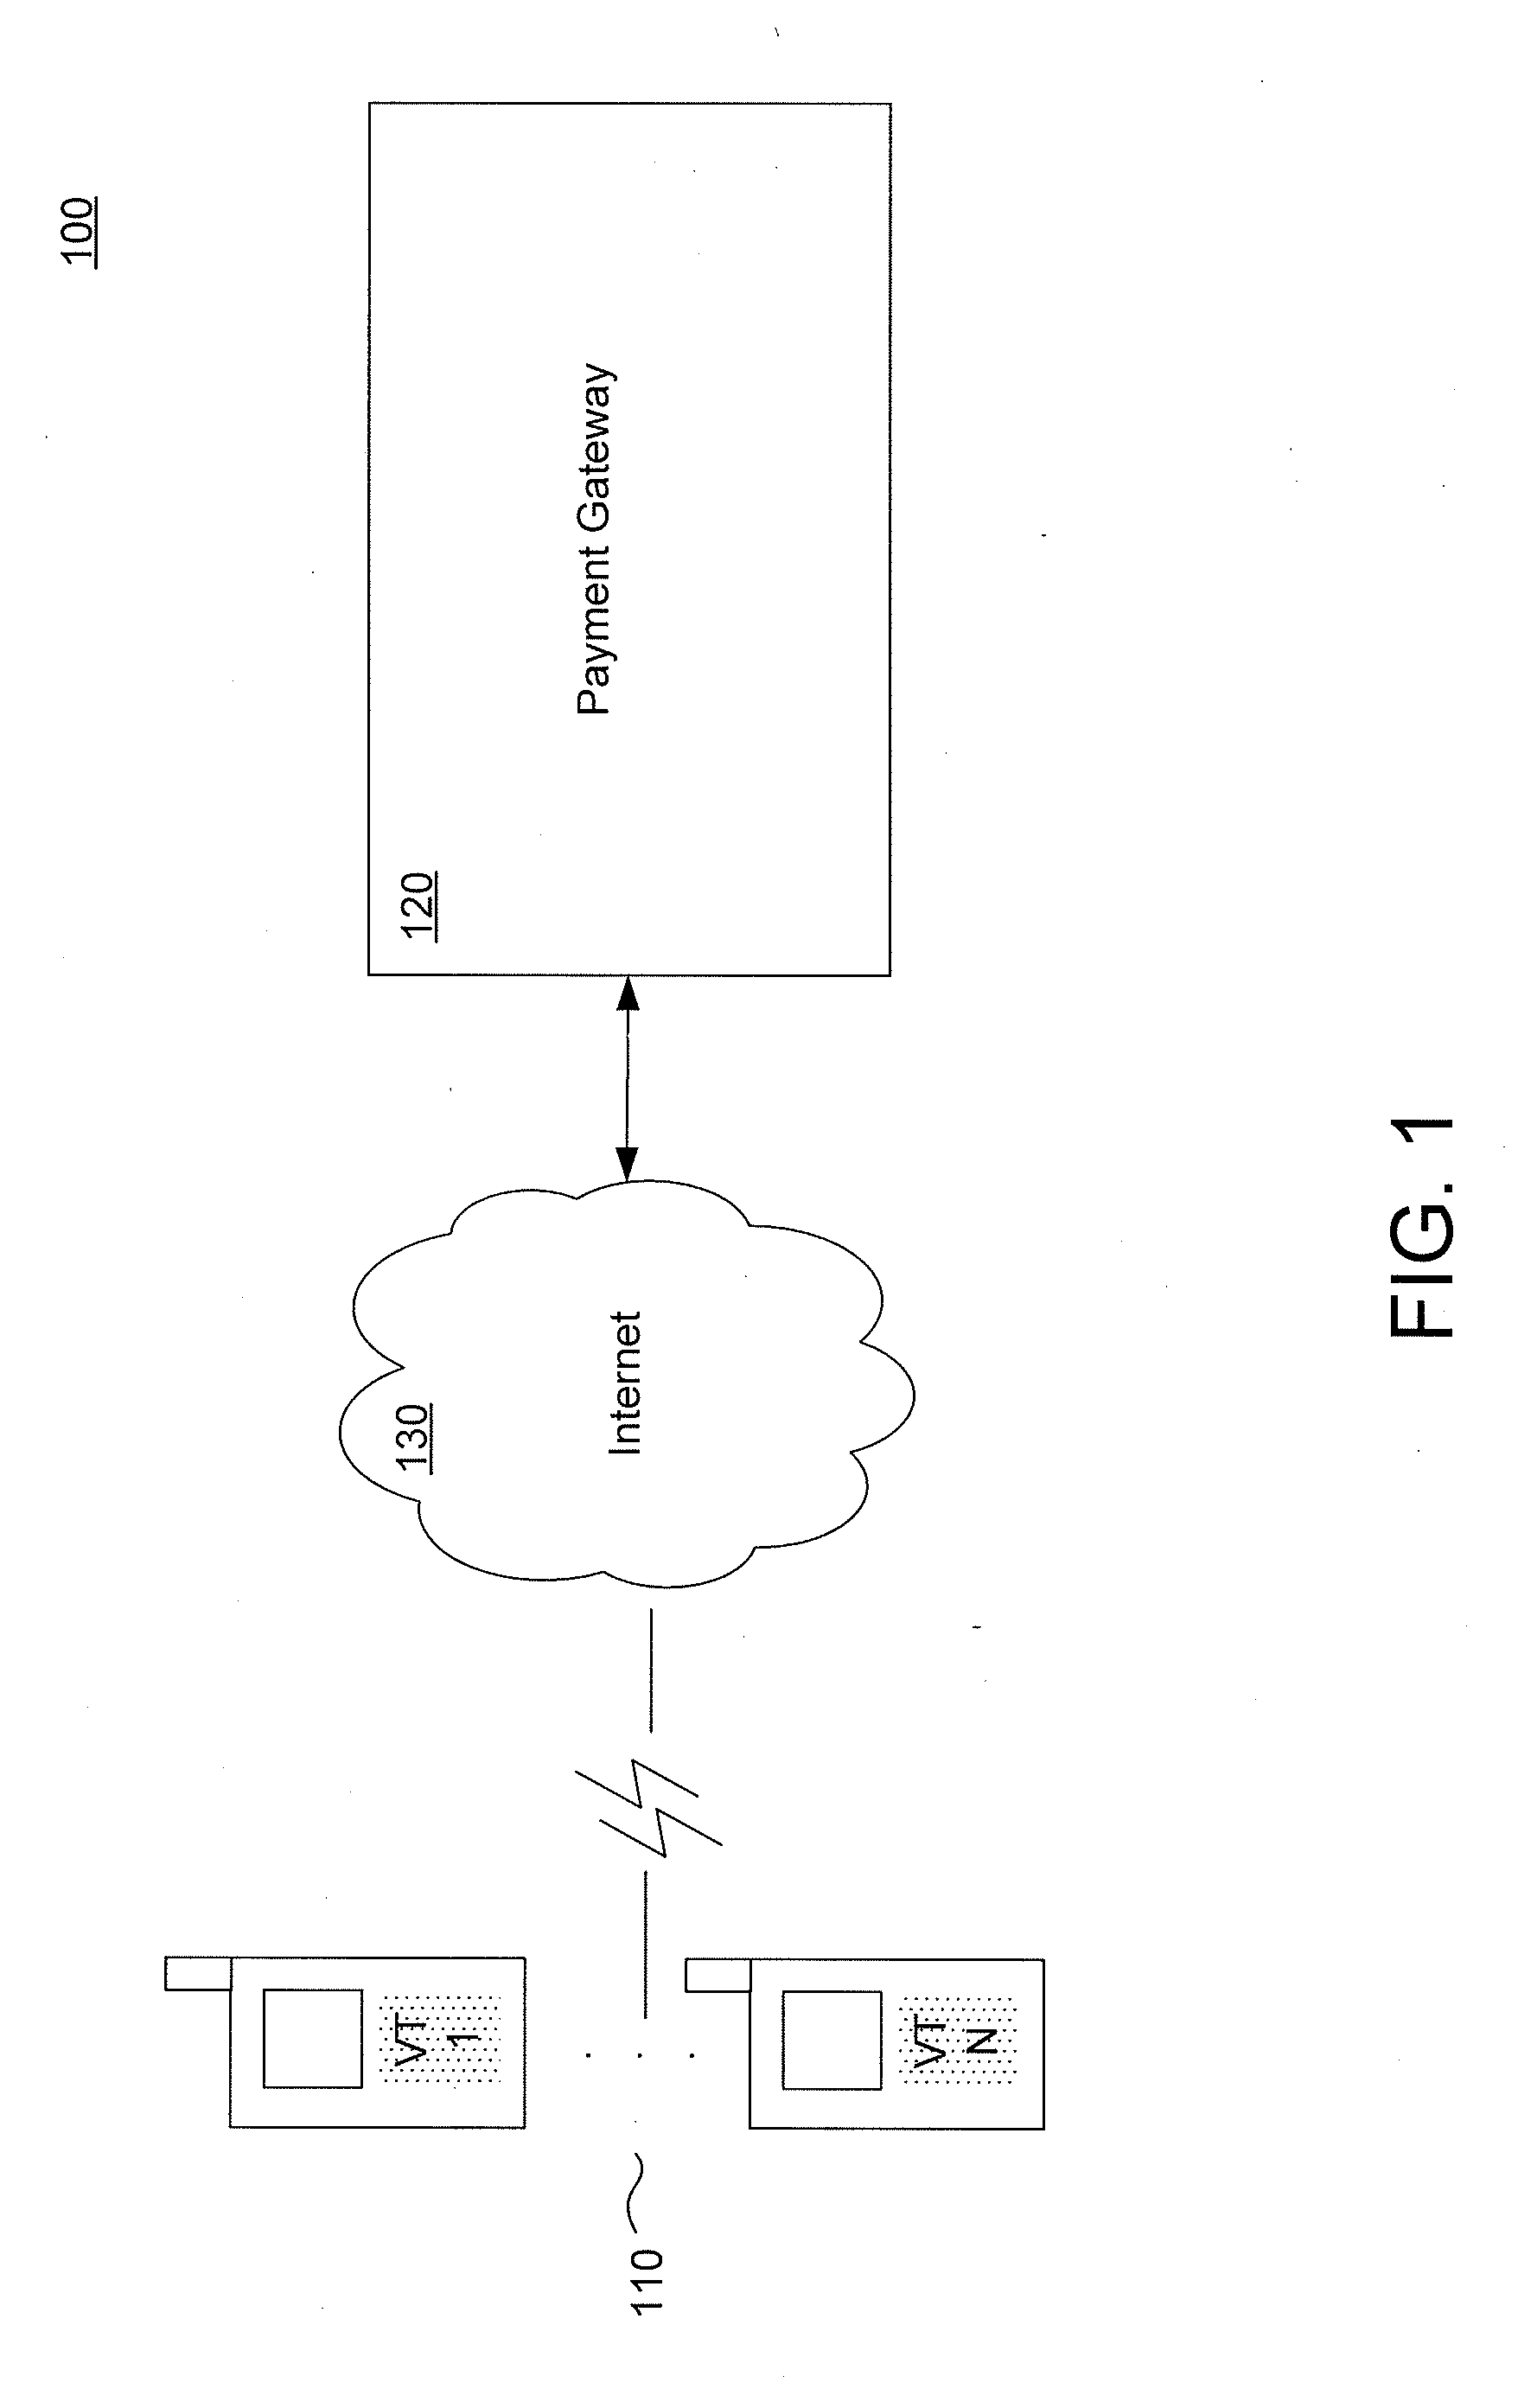 Virtual point of sale terminal and electronic wallet apparatuses and methods for processing secure wireless payment transactions